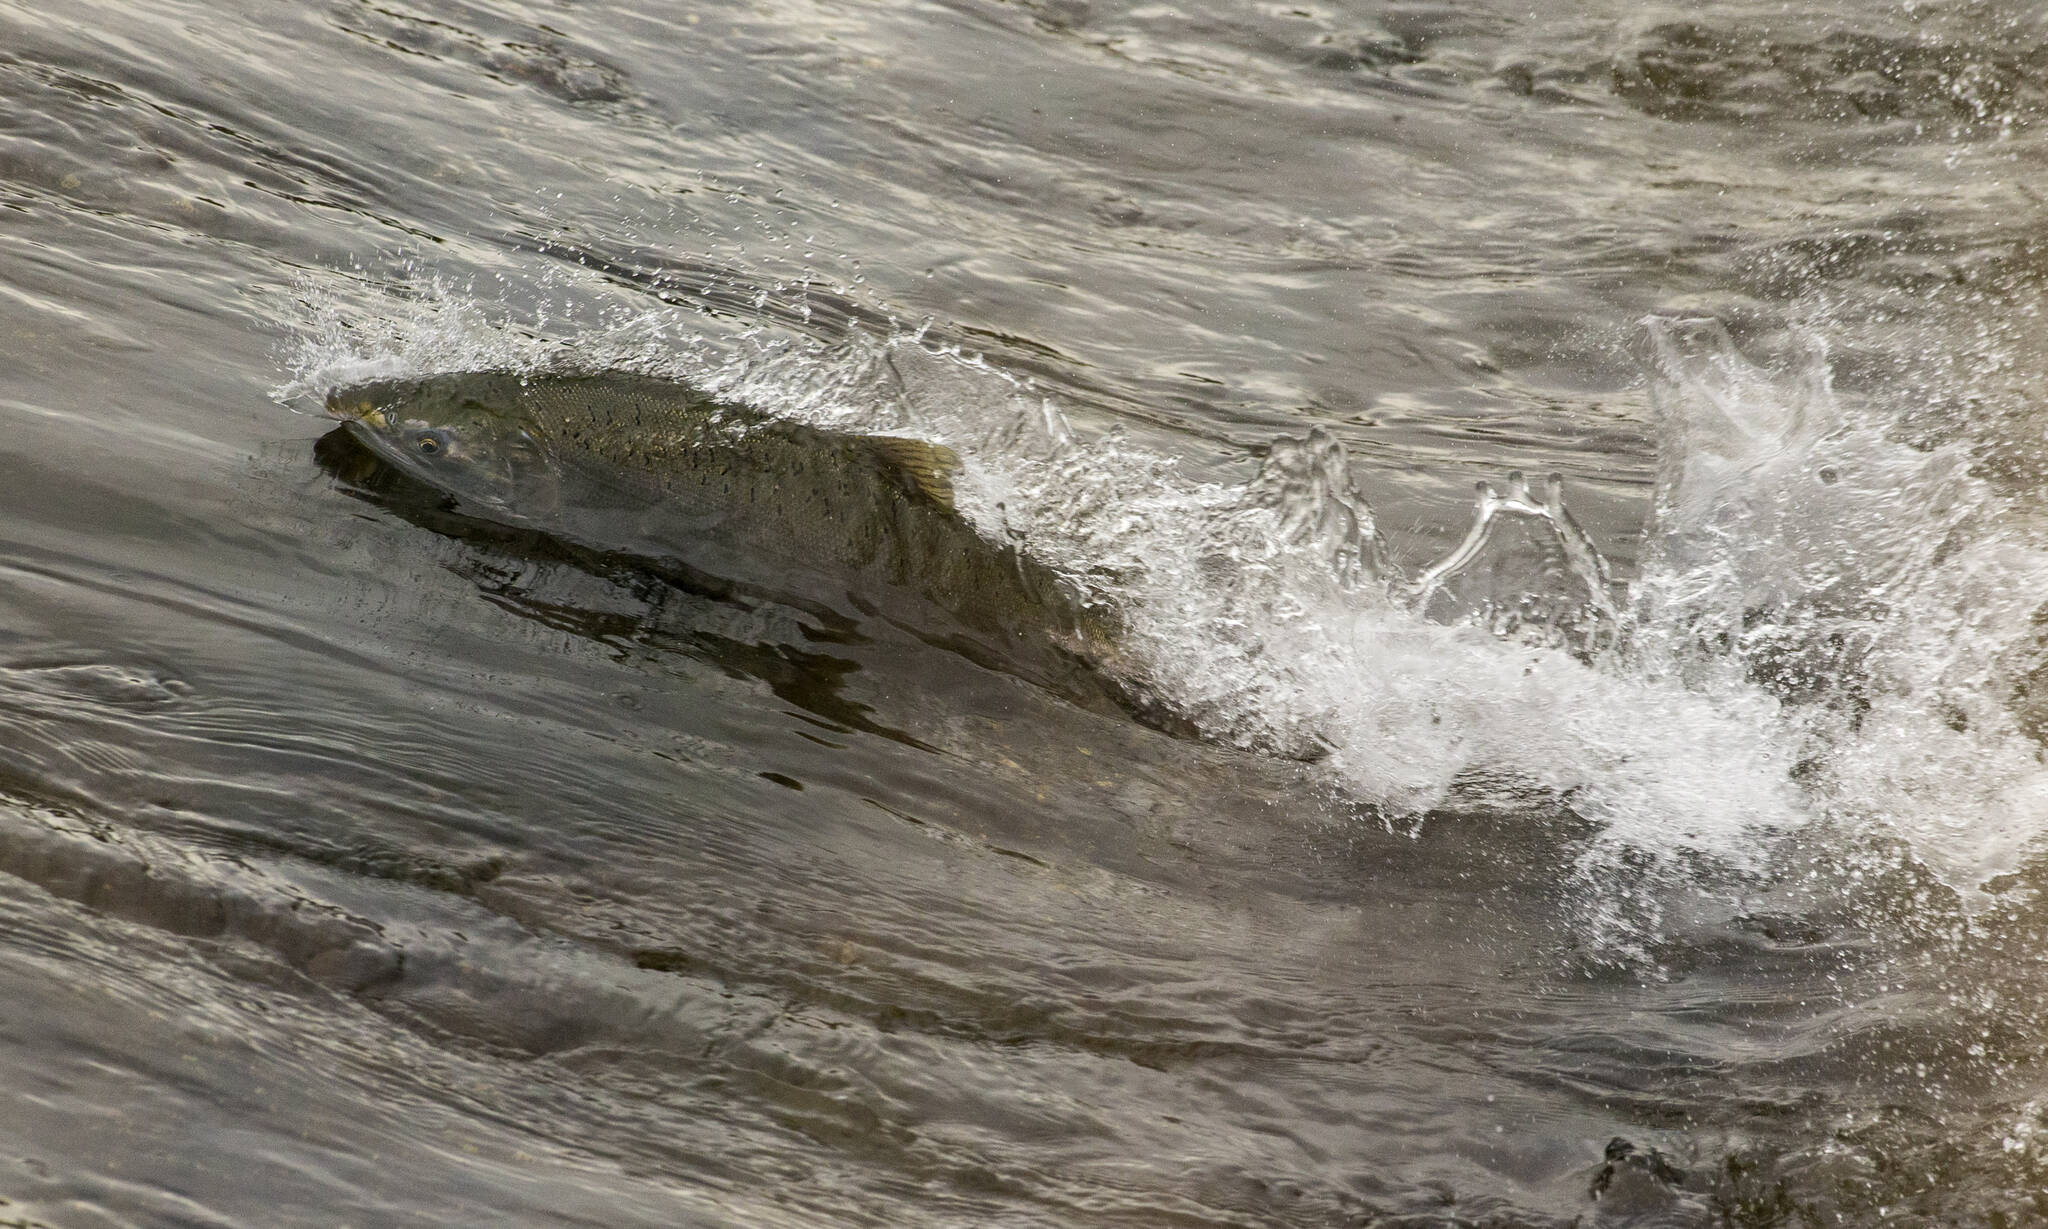 Chinook salmon jump and swim over a weir in the Cook Slough on Wednesday, Sept. 22, 2021 in Silvana, Washington. (Andy Bronson / The Herald)